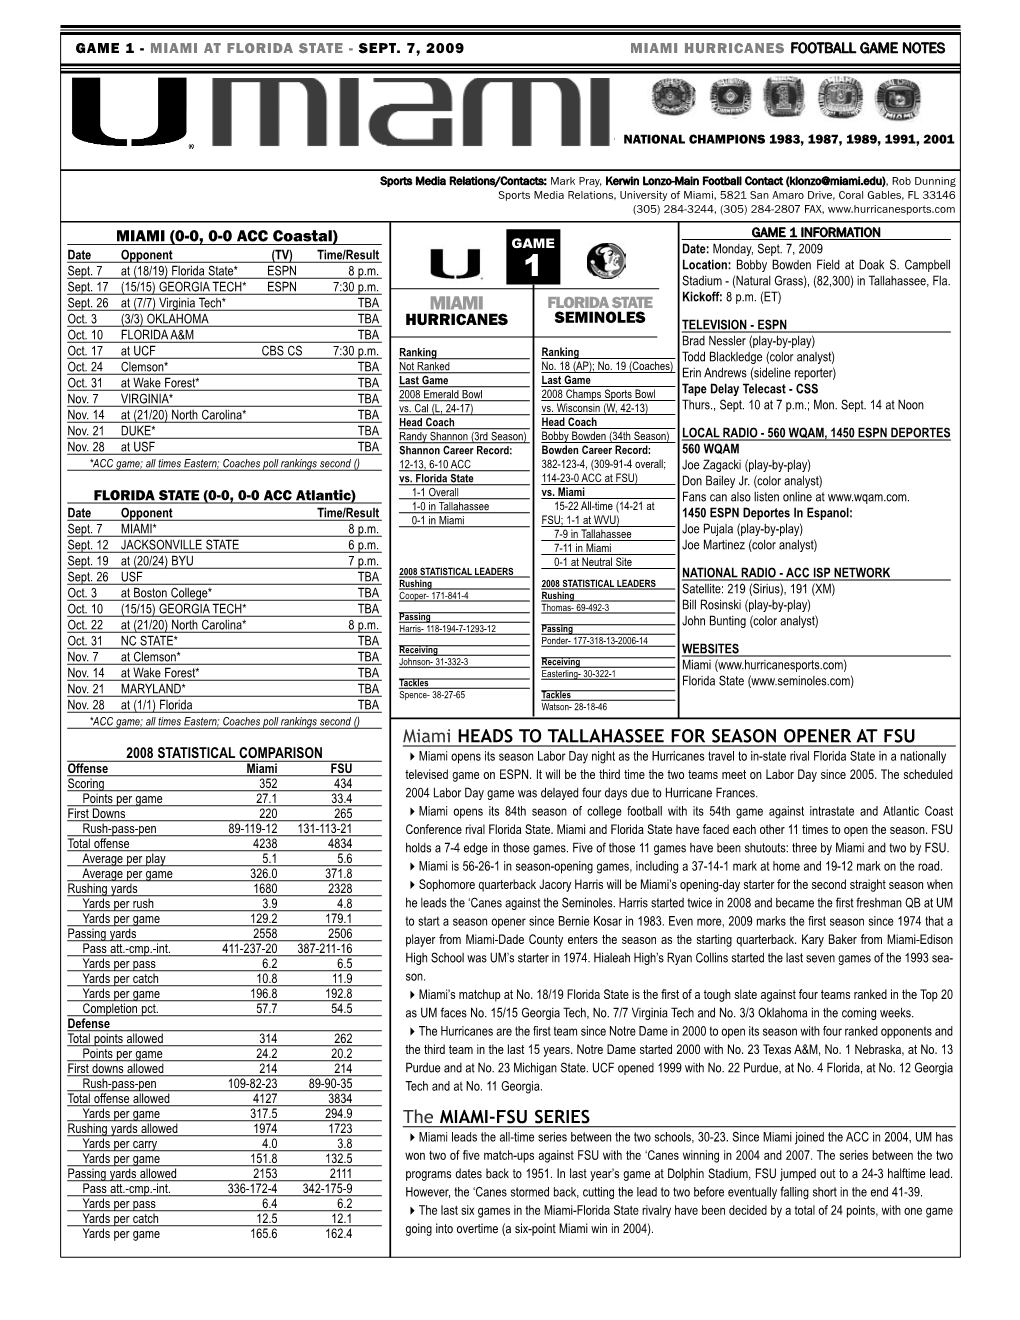 09 1- Florida State Game Notes Final.Qxp